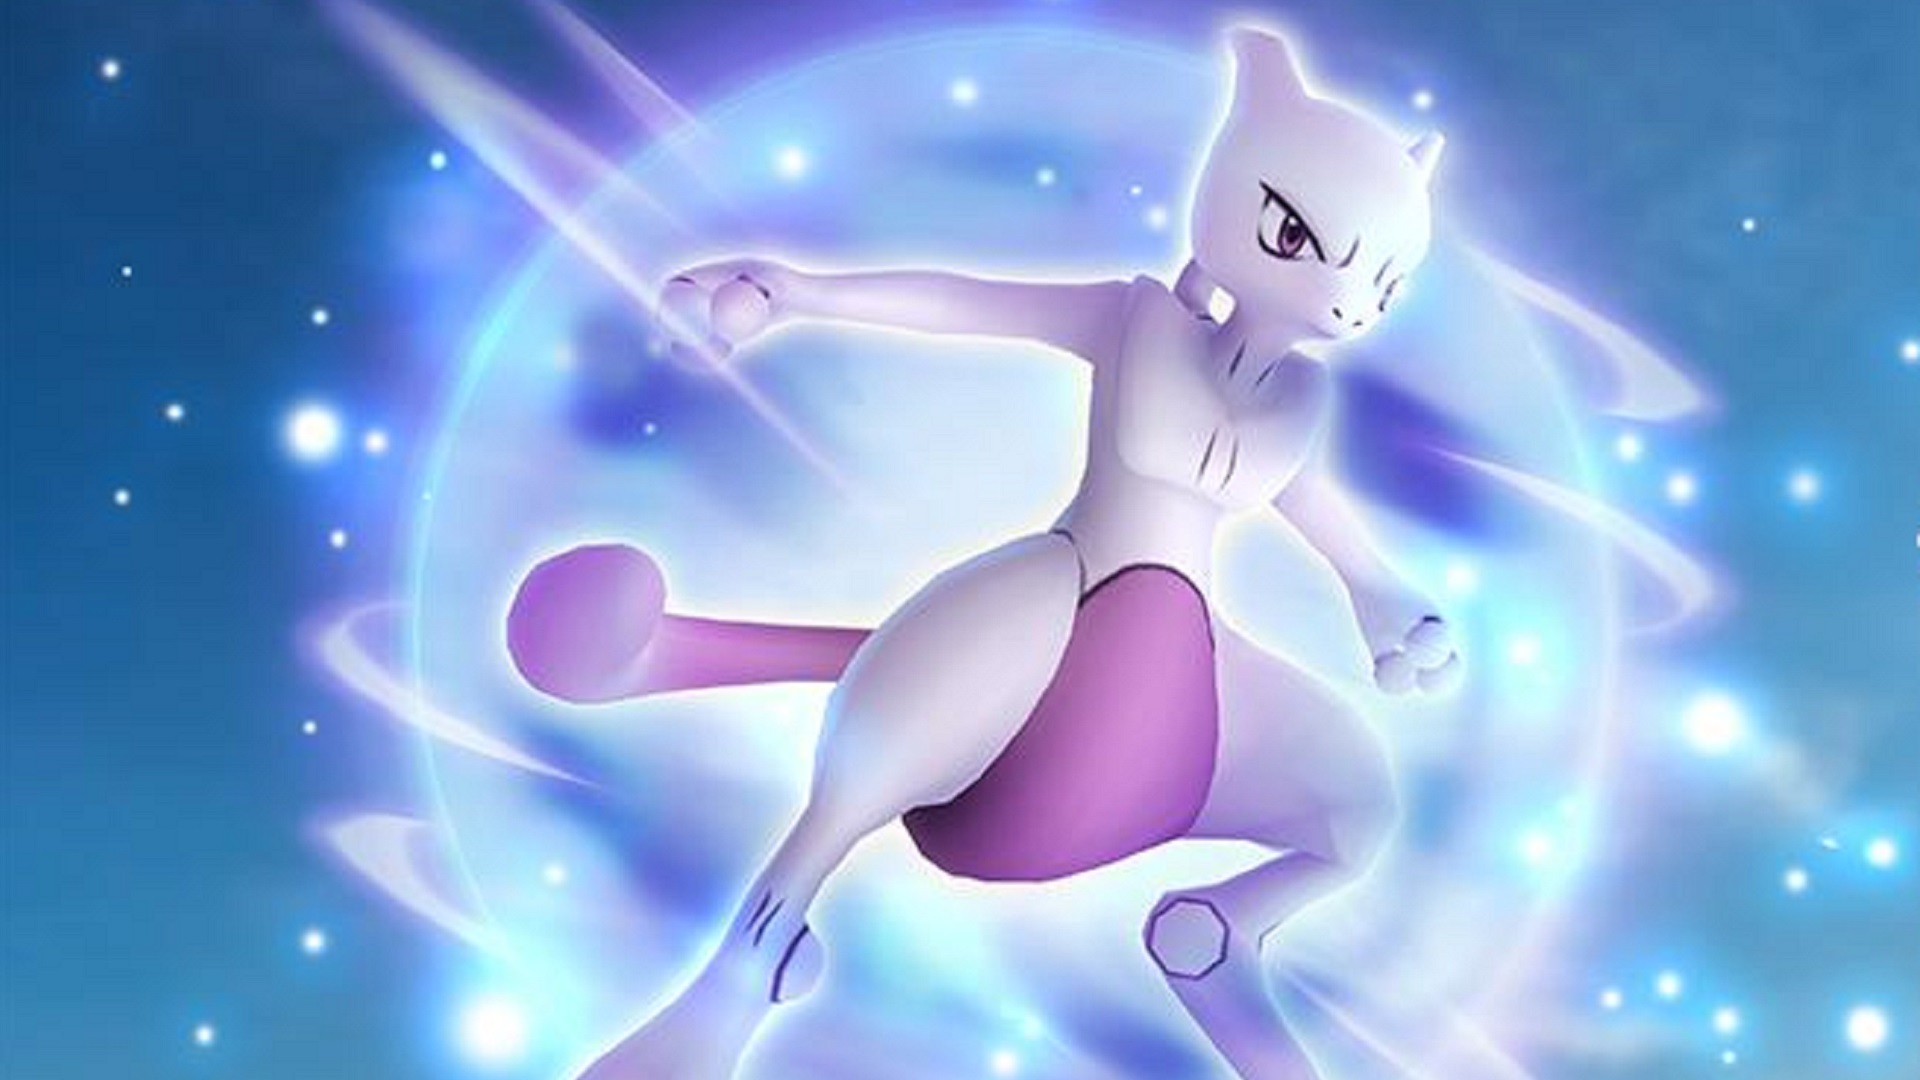 Pokémon GO Pancham: Mewtwo powers up to use a powerful attack.